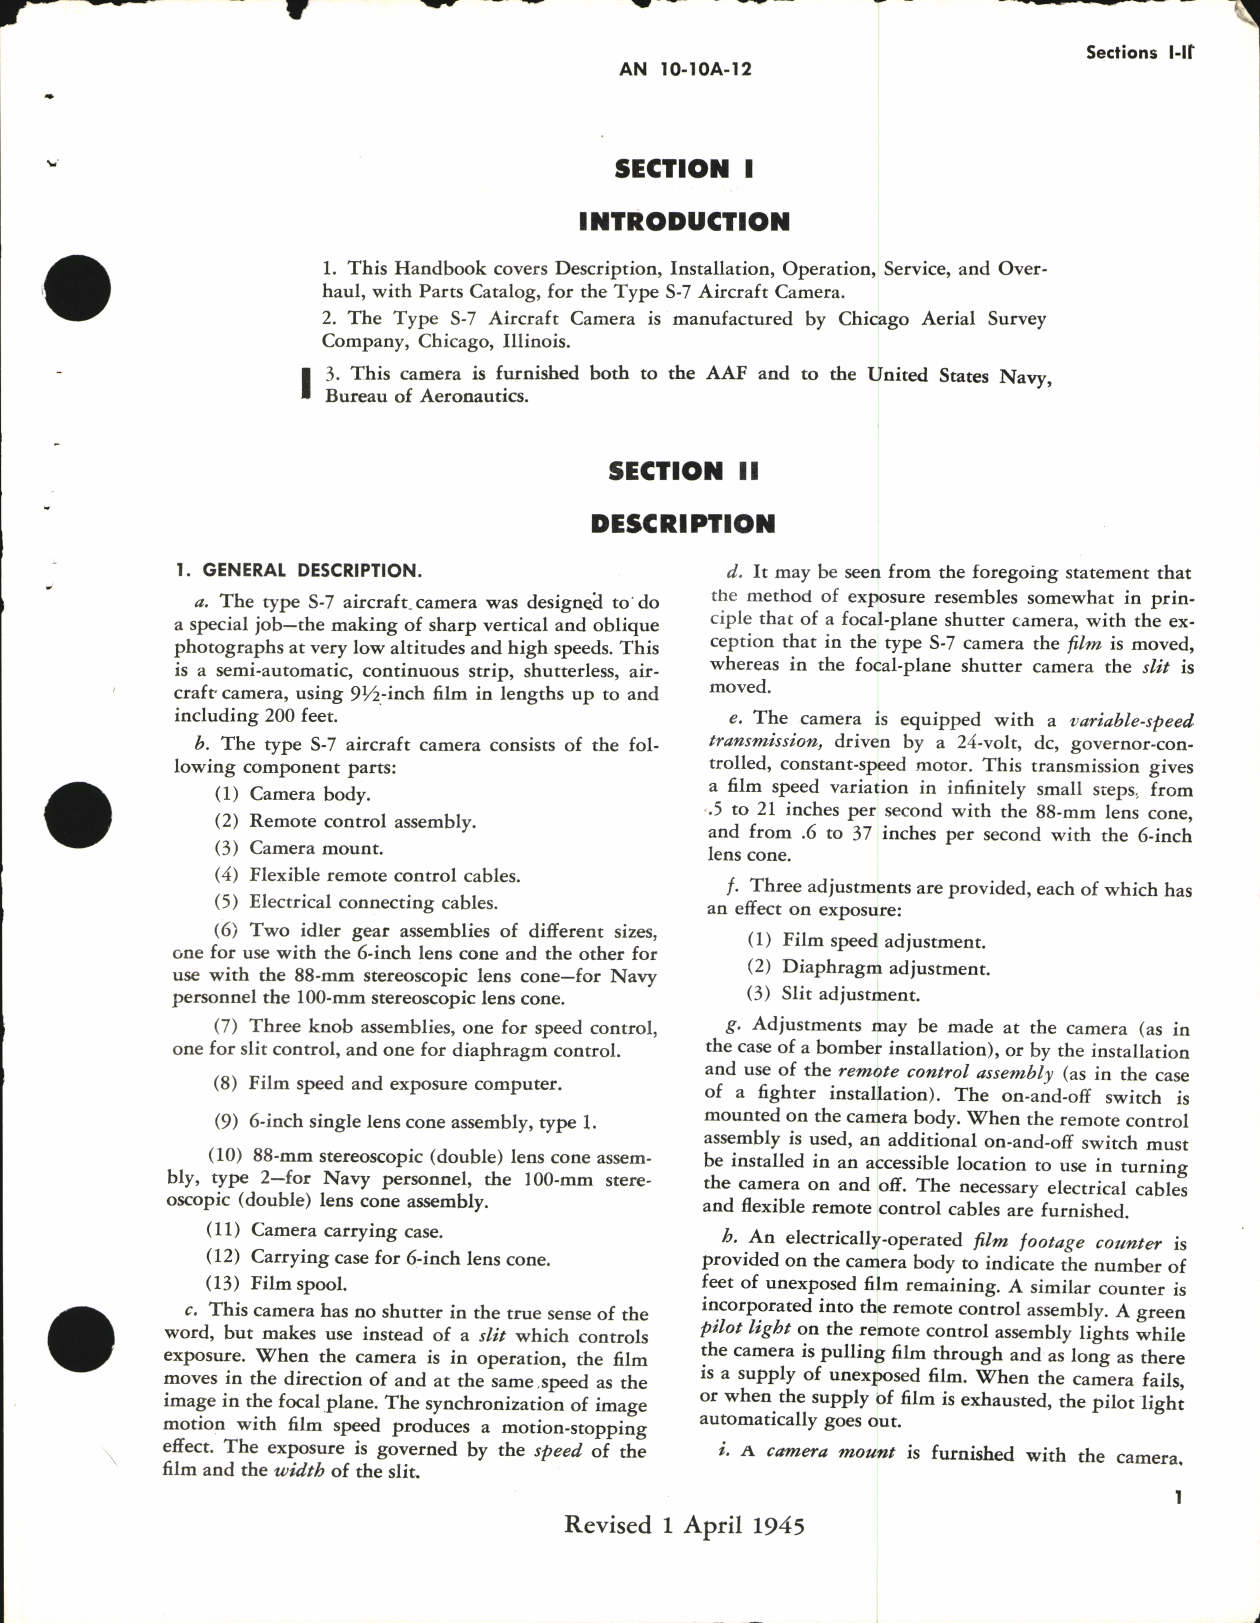 Sample page 5 from AirCorps Library document: Operation, Service, & Overhaul Instructions with Parts Catalog for Type S-7 Aircraft Camera